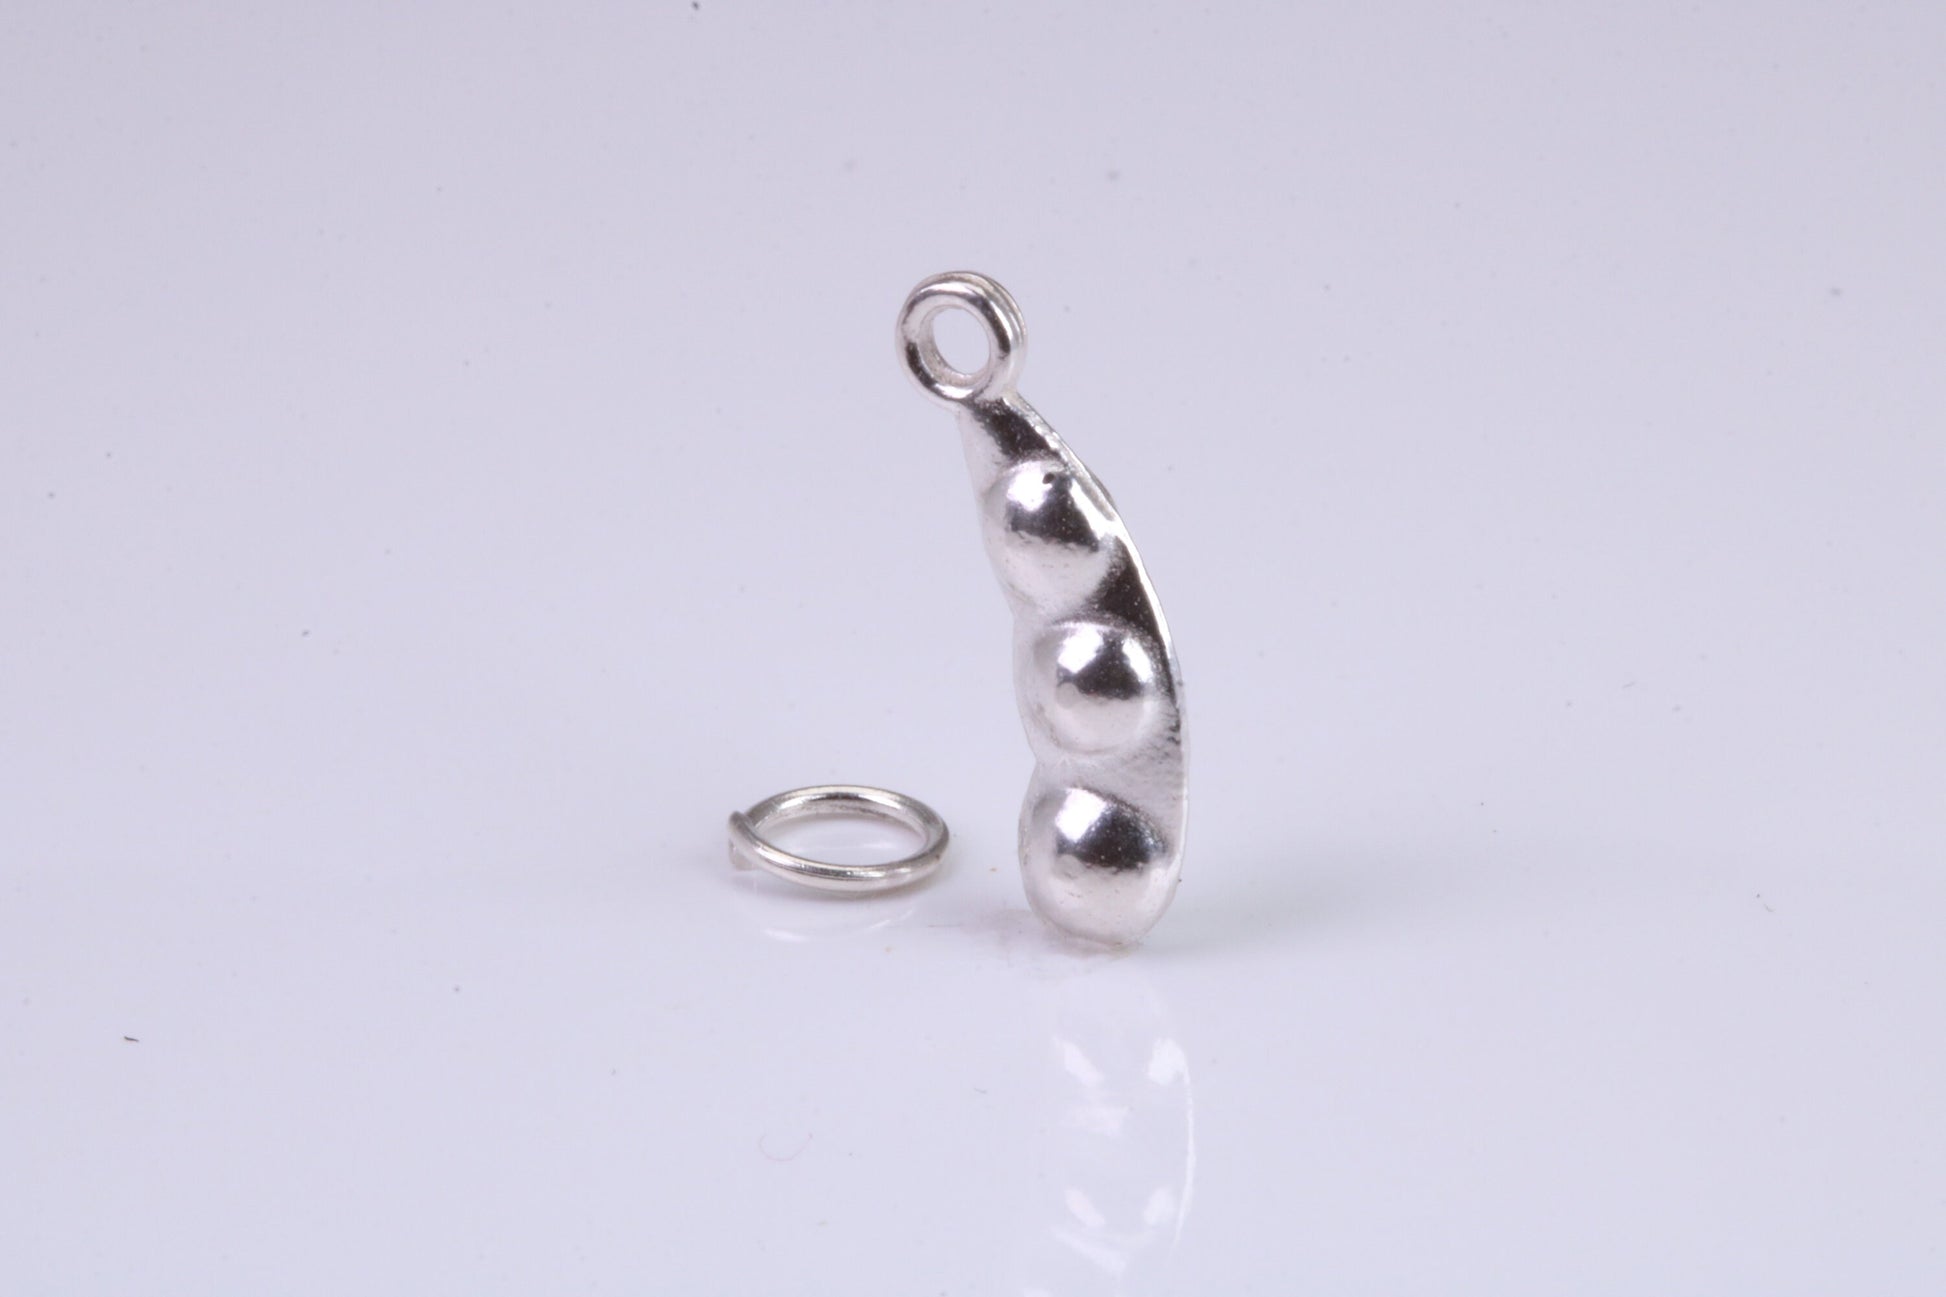 Peapod Charm, Traditional Charm, Made from Solid 925 Grade Sterling Silver, Complete with Attachment Link